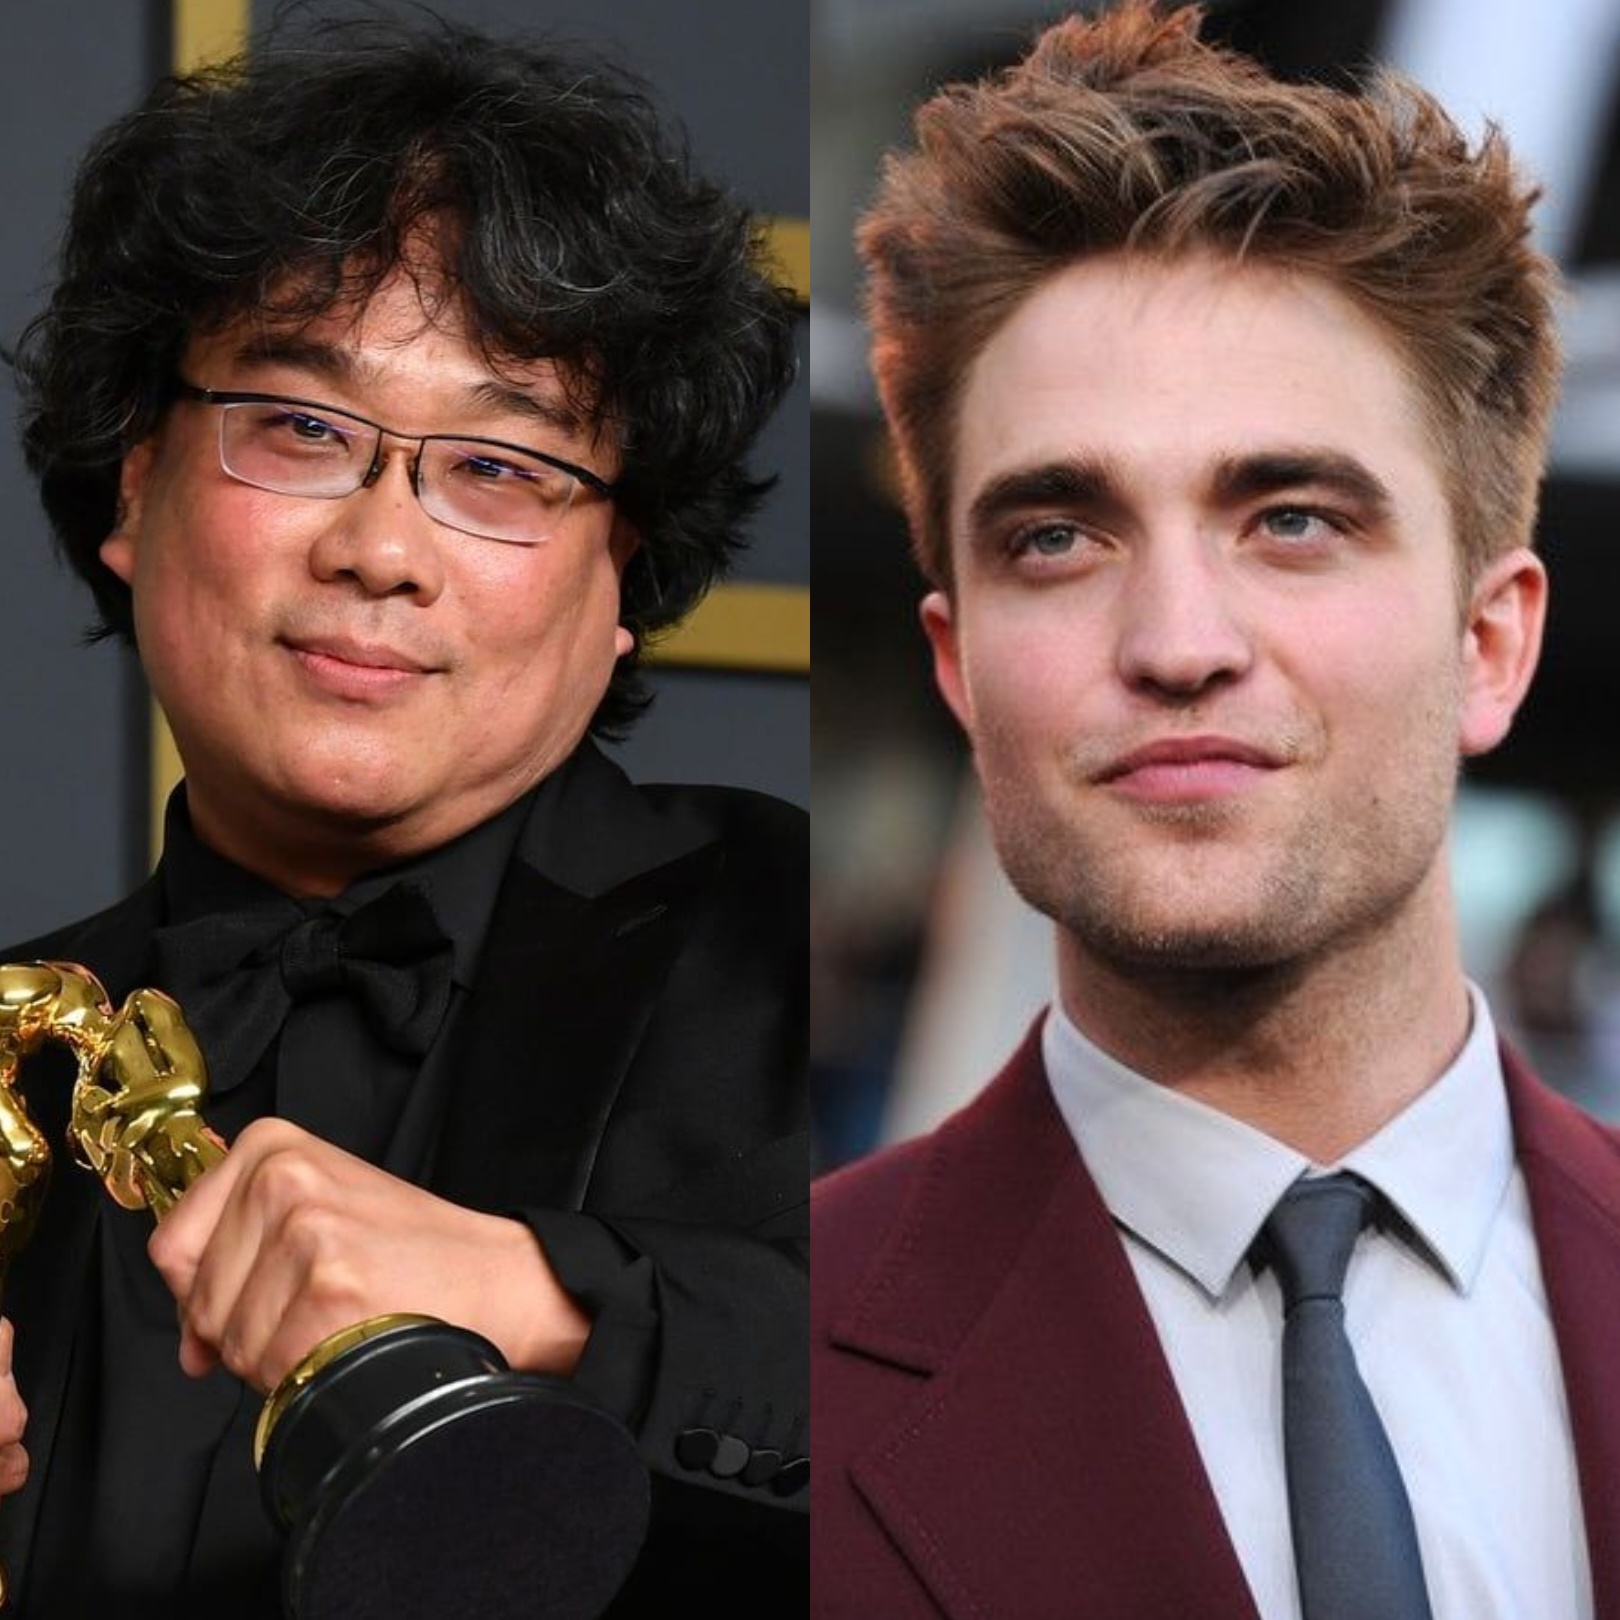 Robert Pattinson will work with Bong Joon Ho for the new movie.